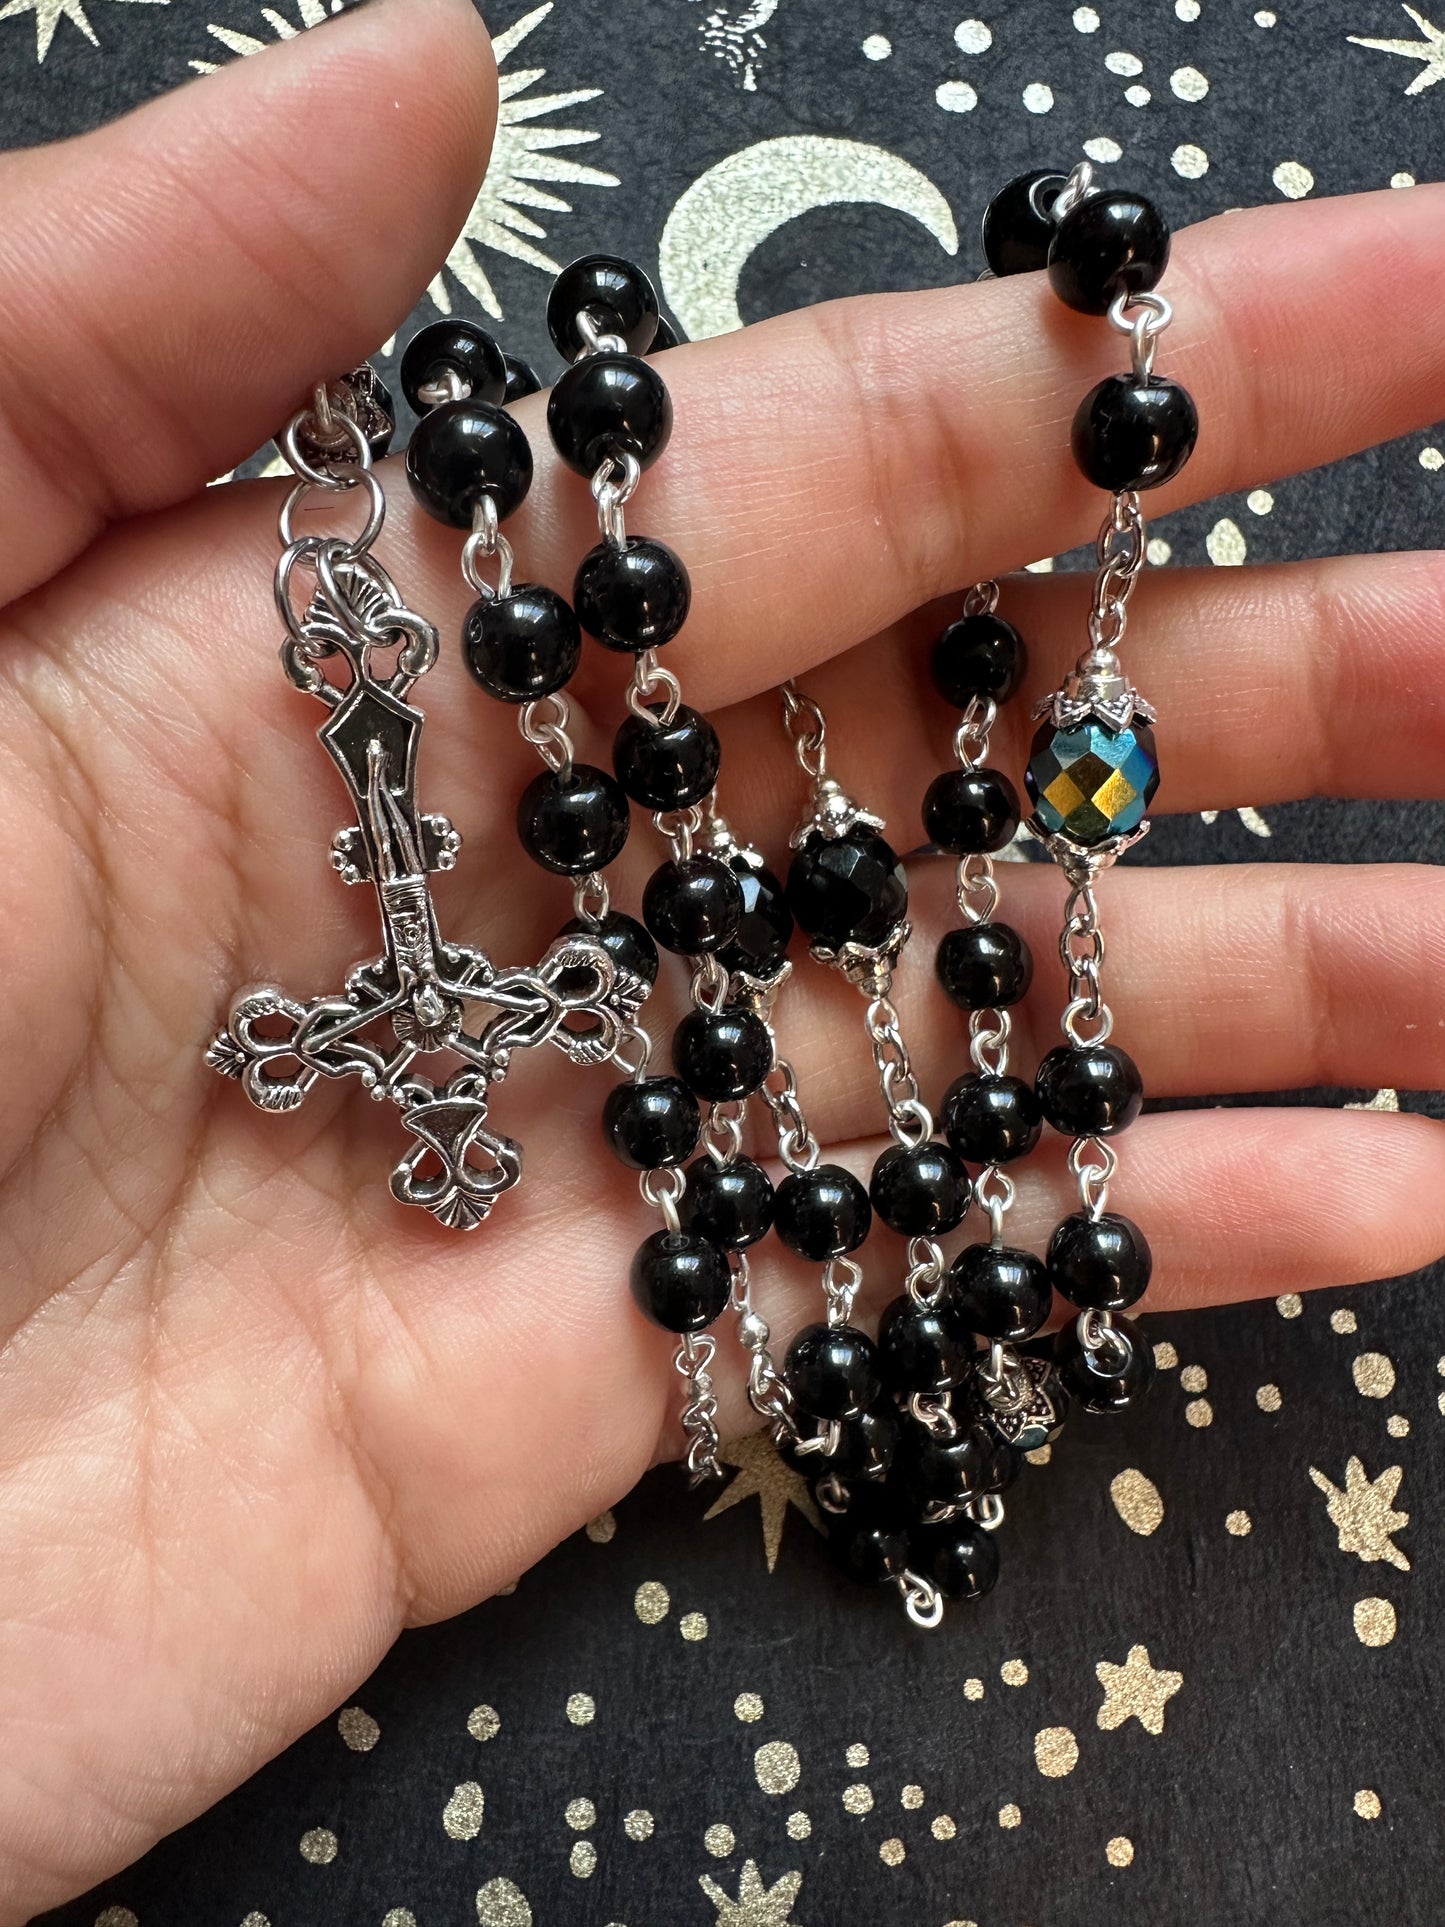 Black Unholy Rosary with Inverted cross – Unholy Rosaries